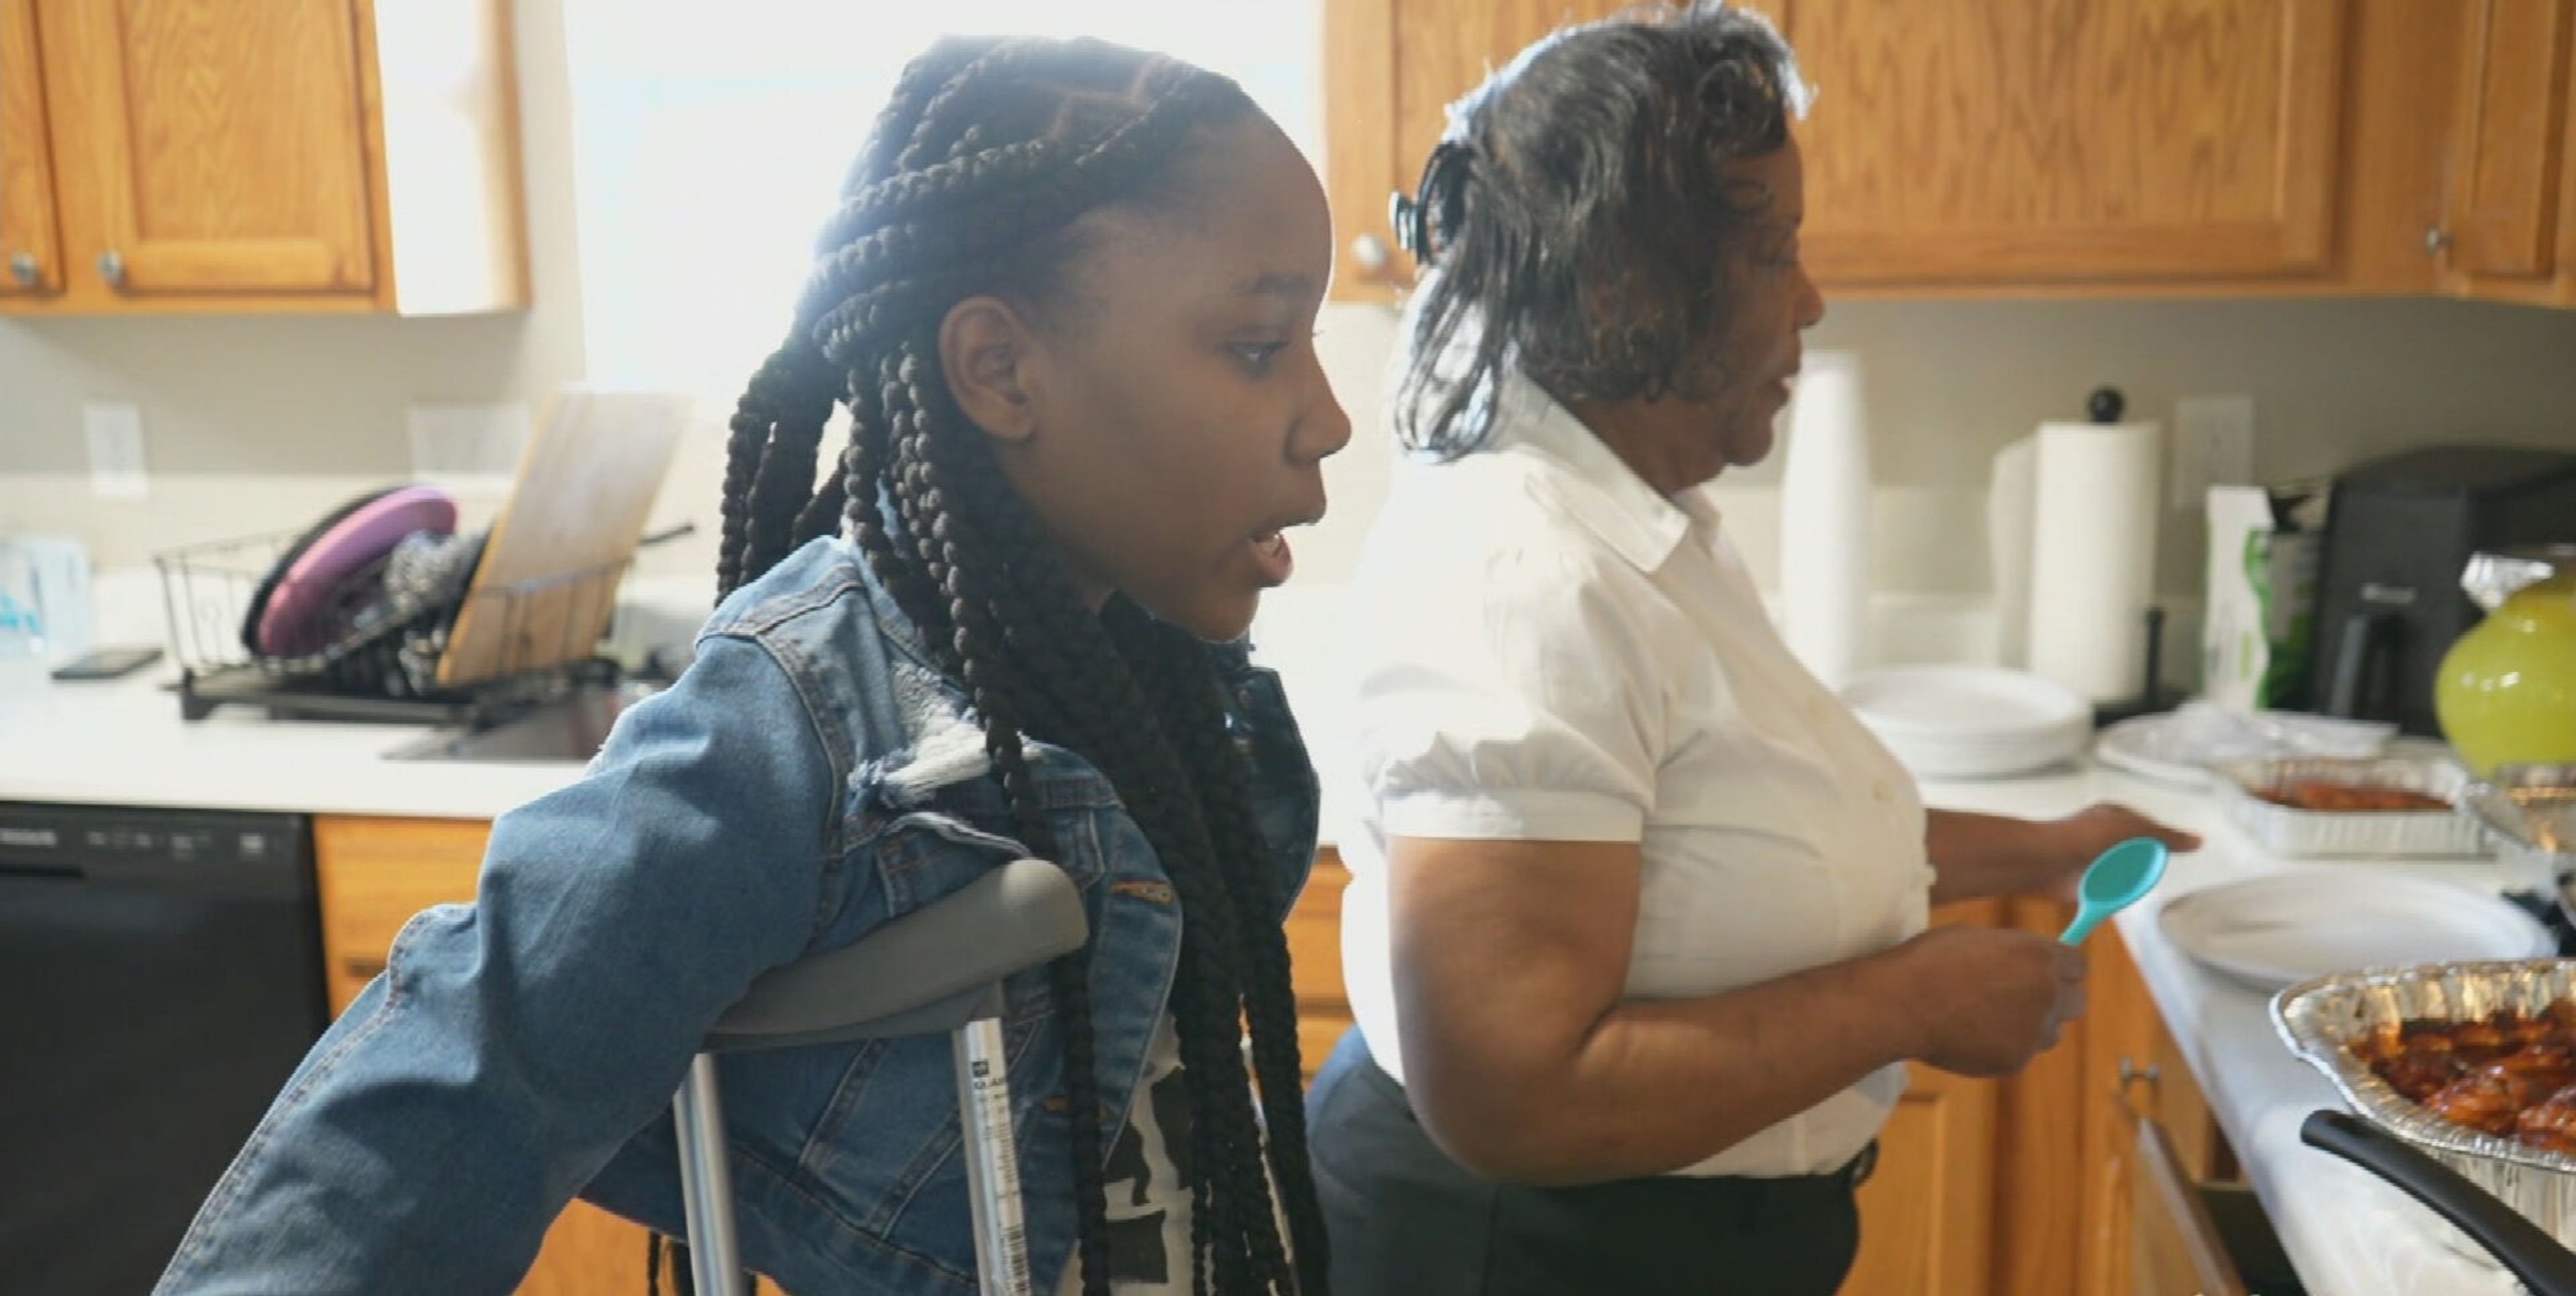 PHOTO: Stacy and Aalayah Fulmore have had to make major life changes after she was shot in her home last year.